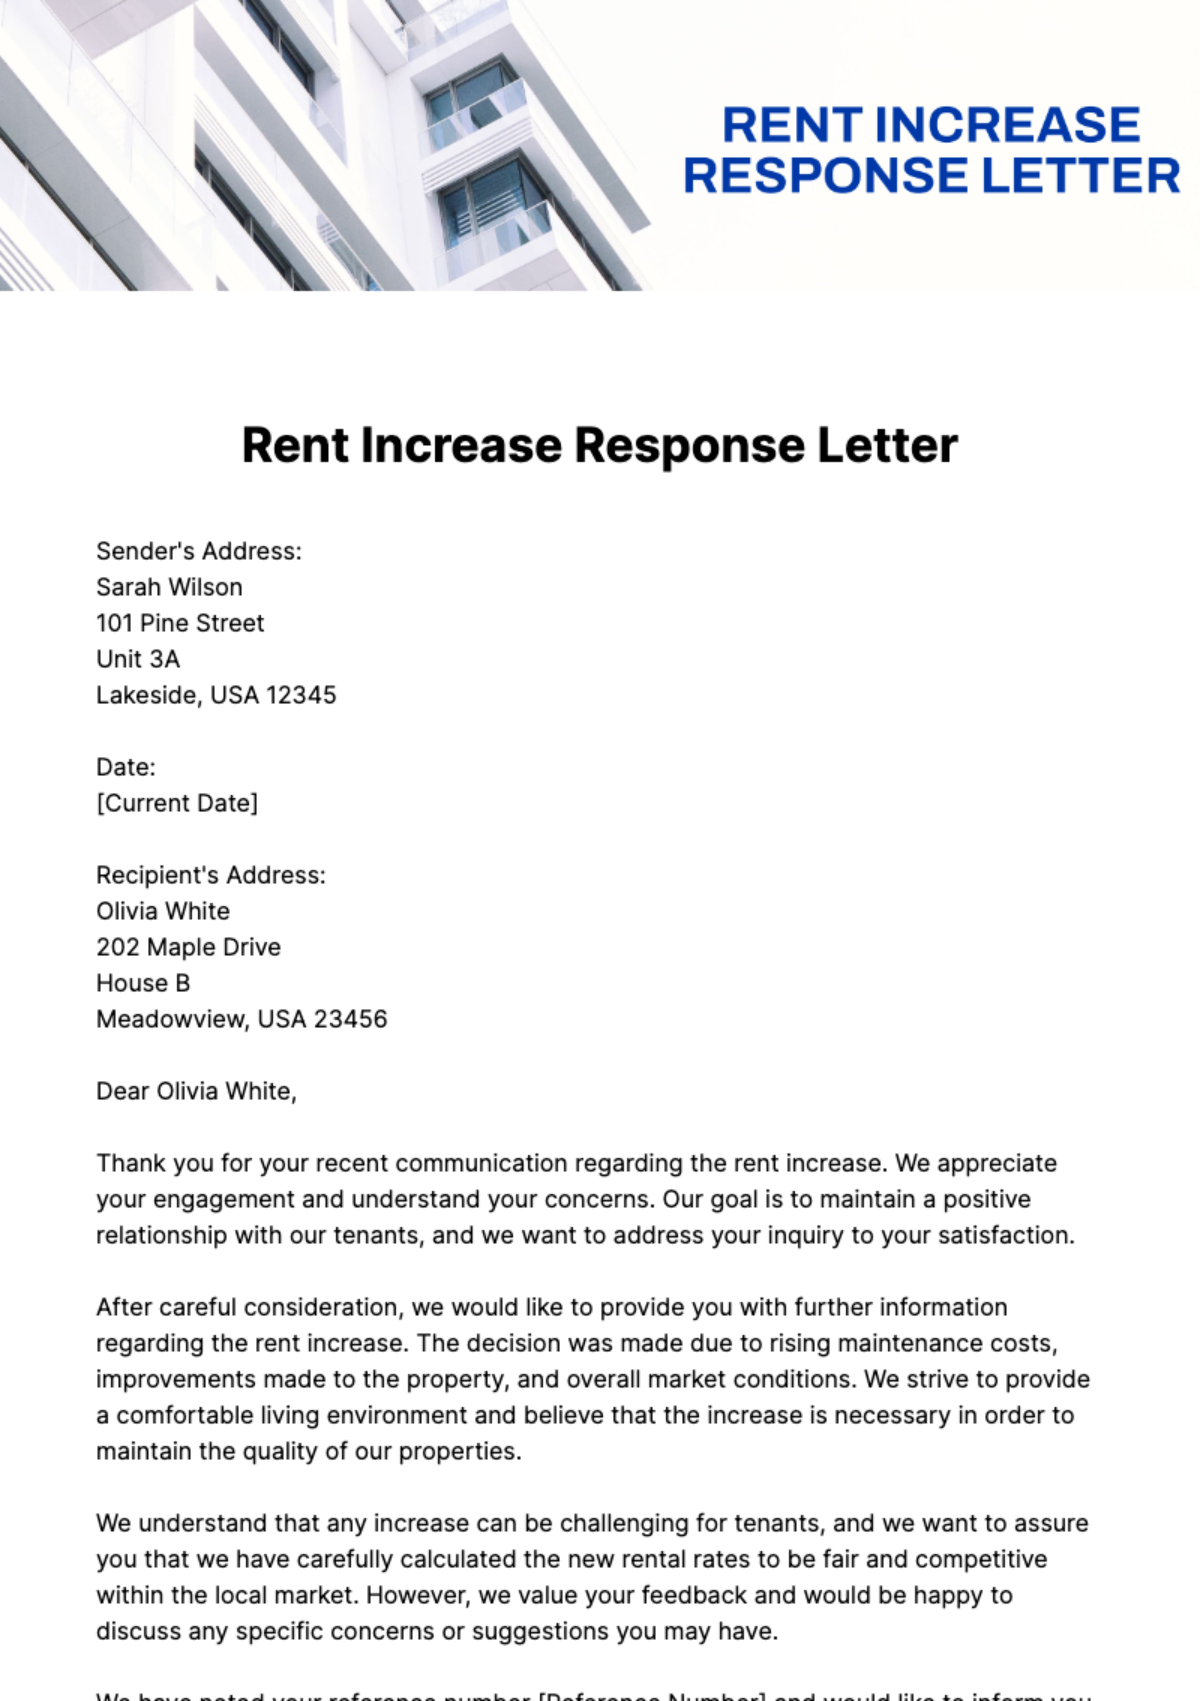 Free Rent Increase Response Letter Template